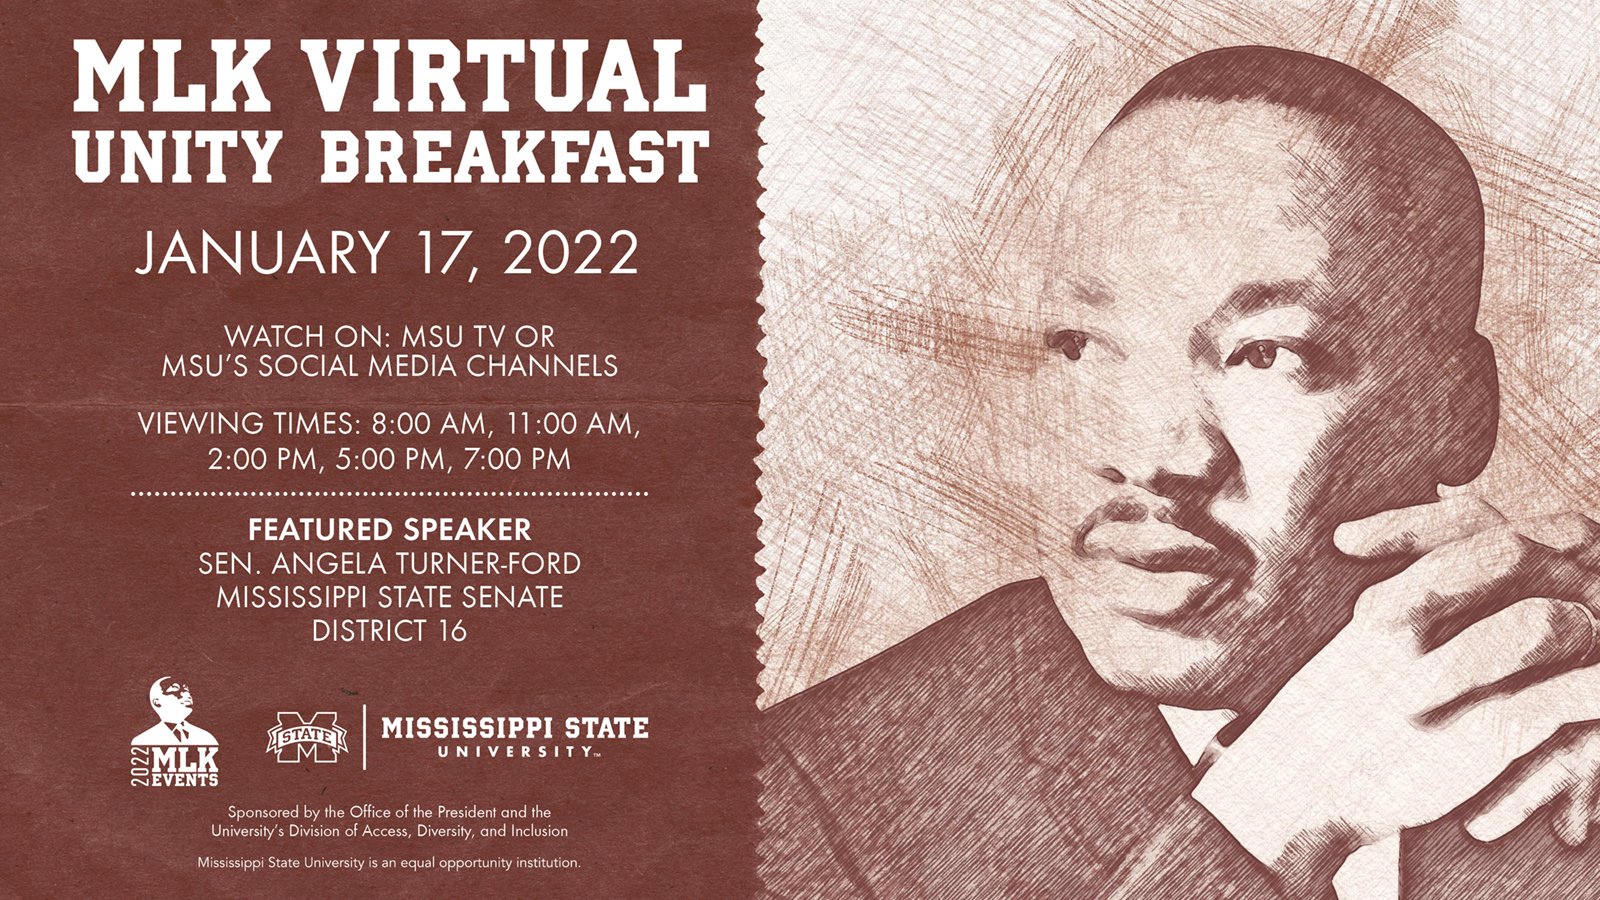 Maroon and white graphic with image of Martin Luther King Jr.